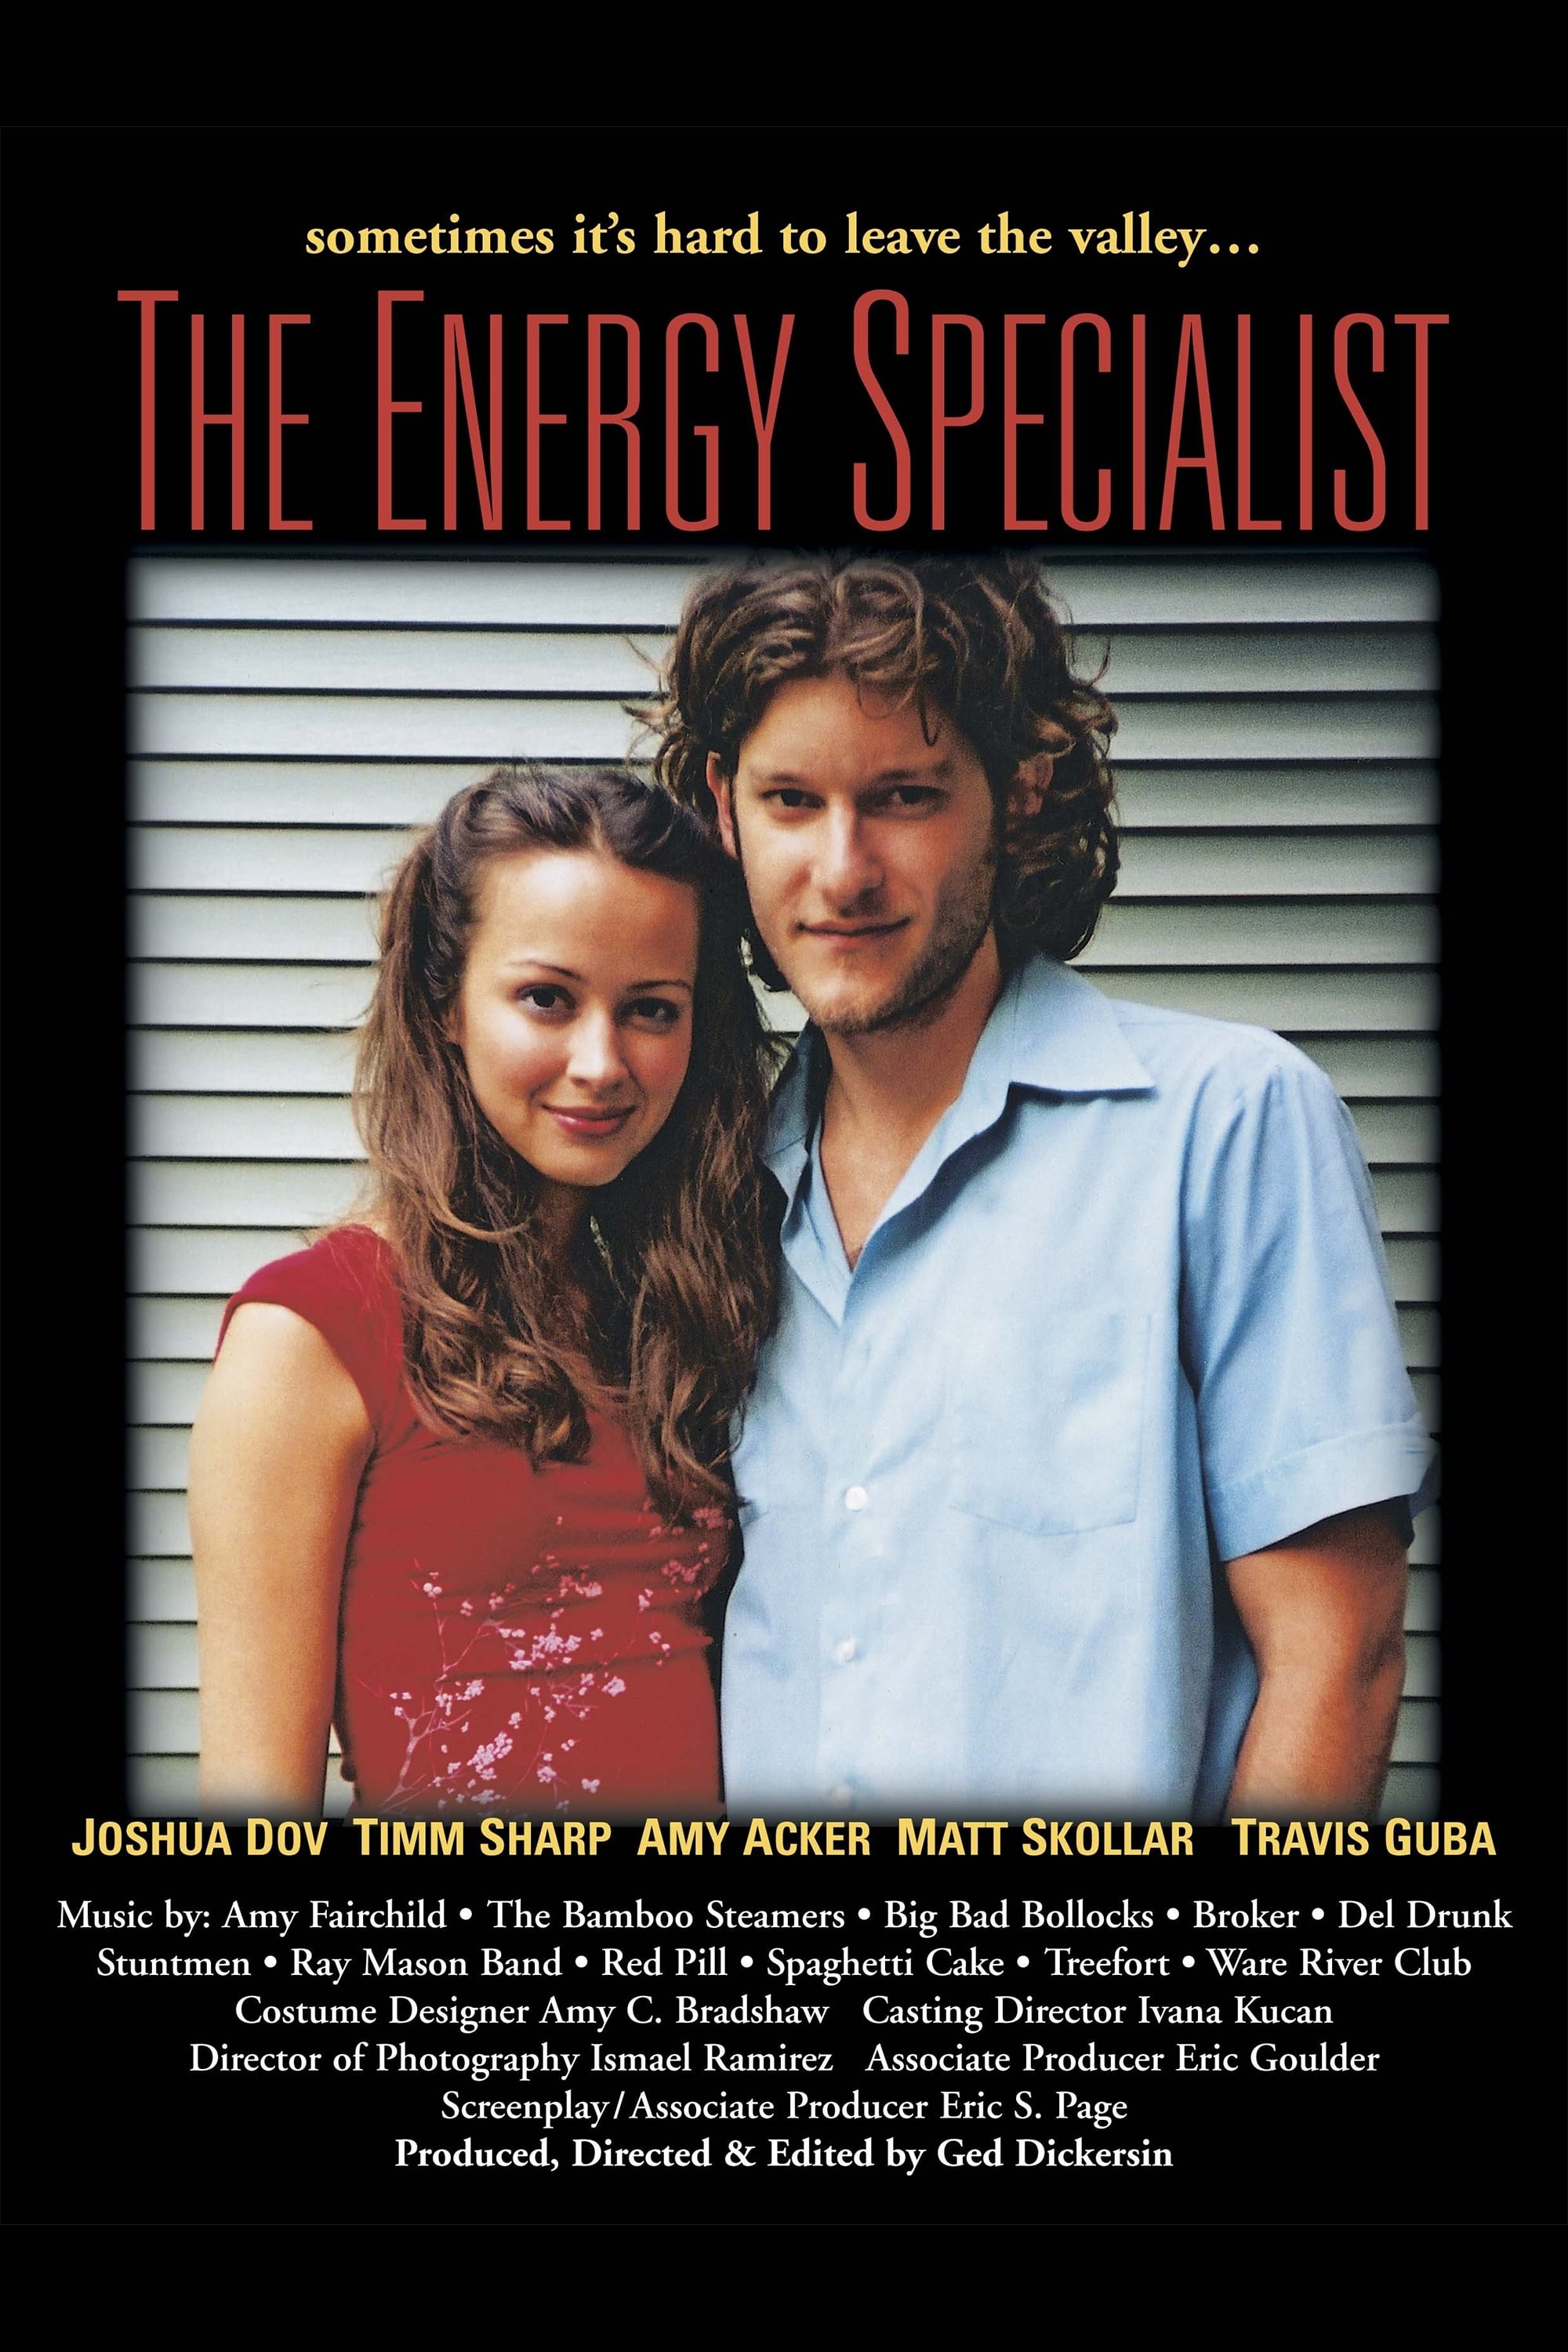 The Energy Specialist